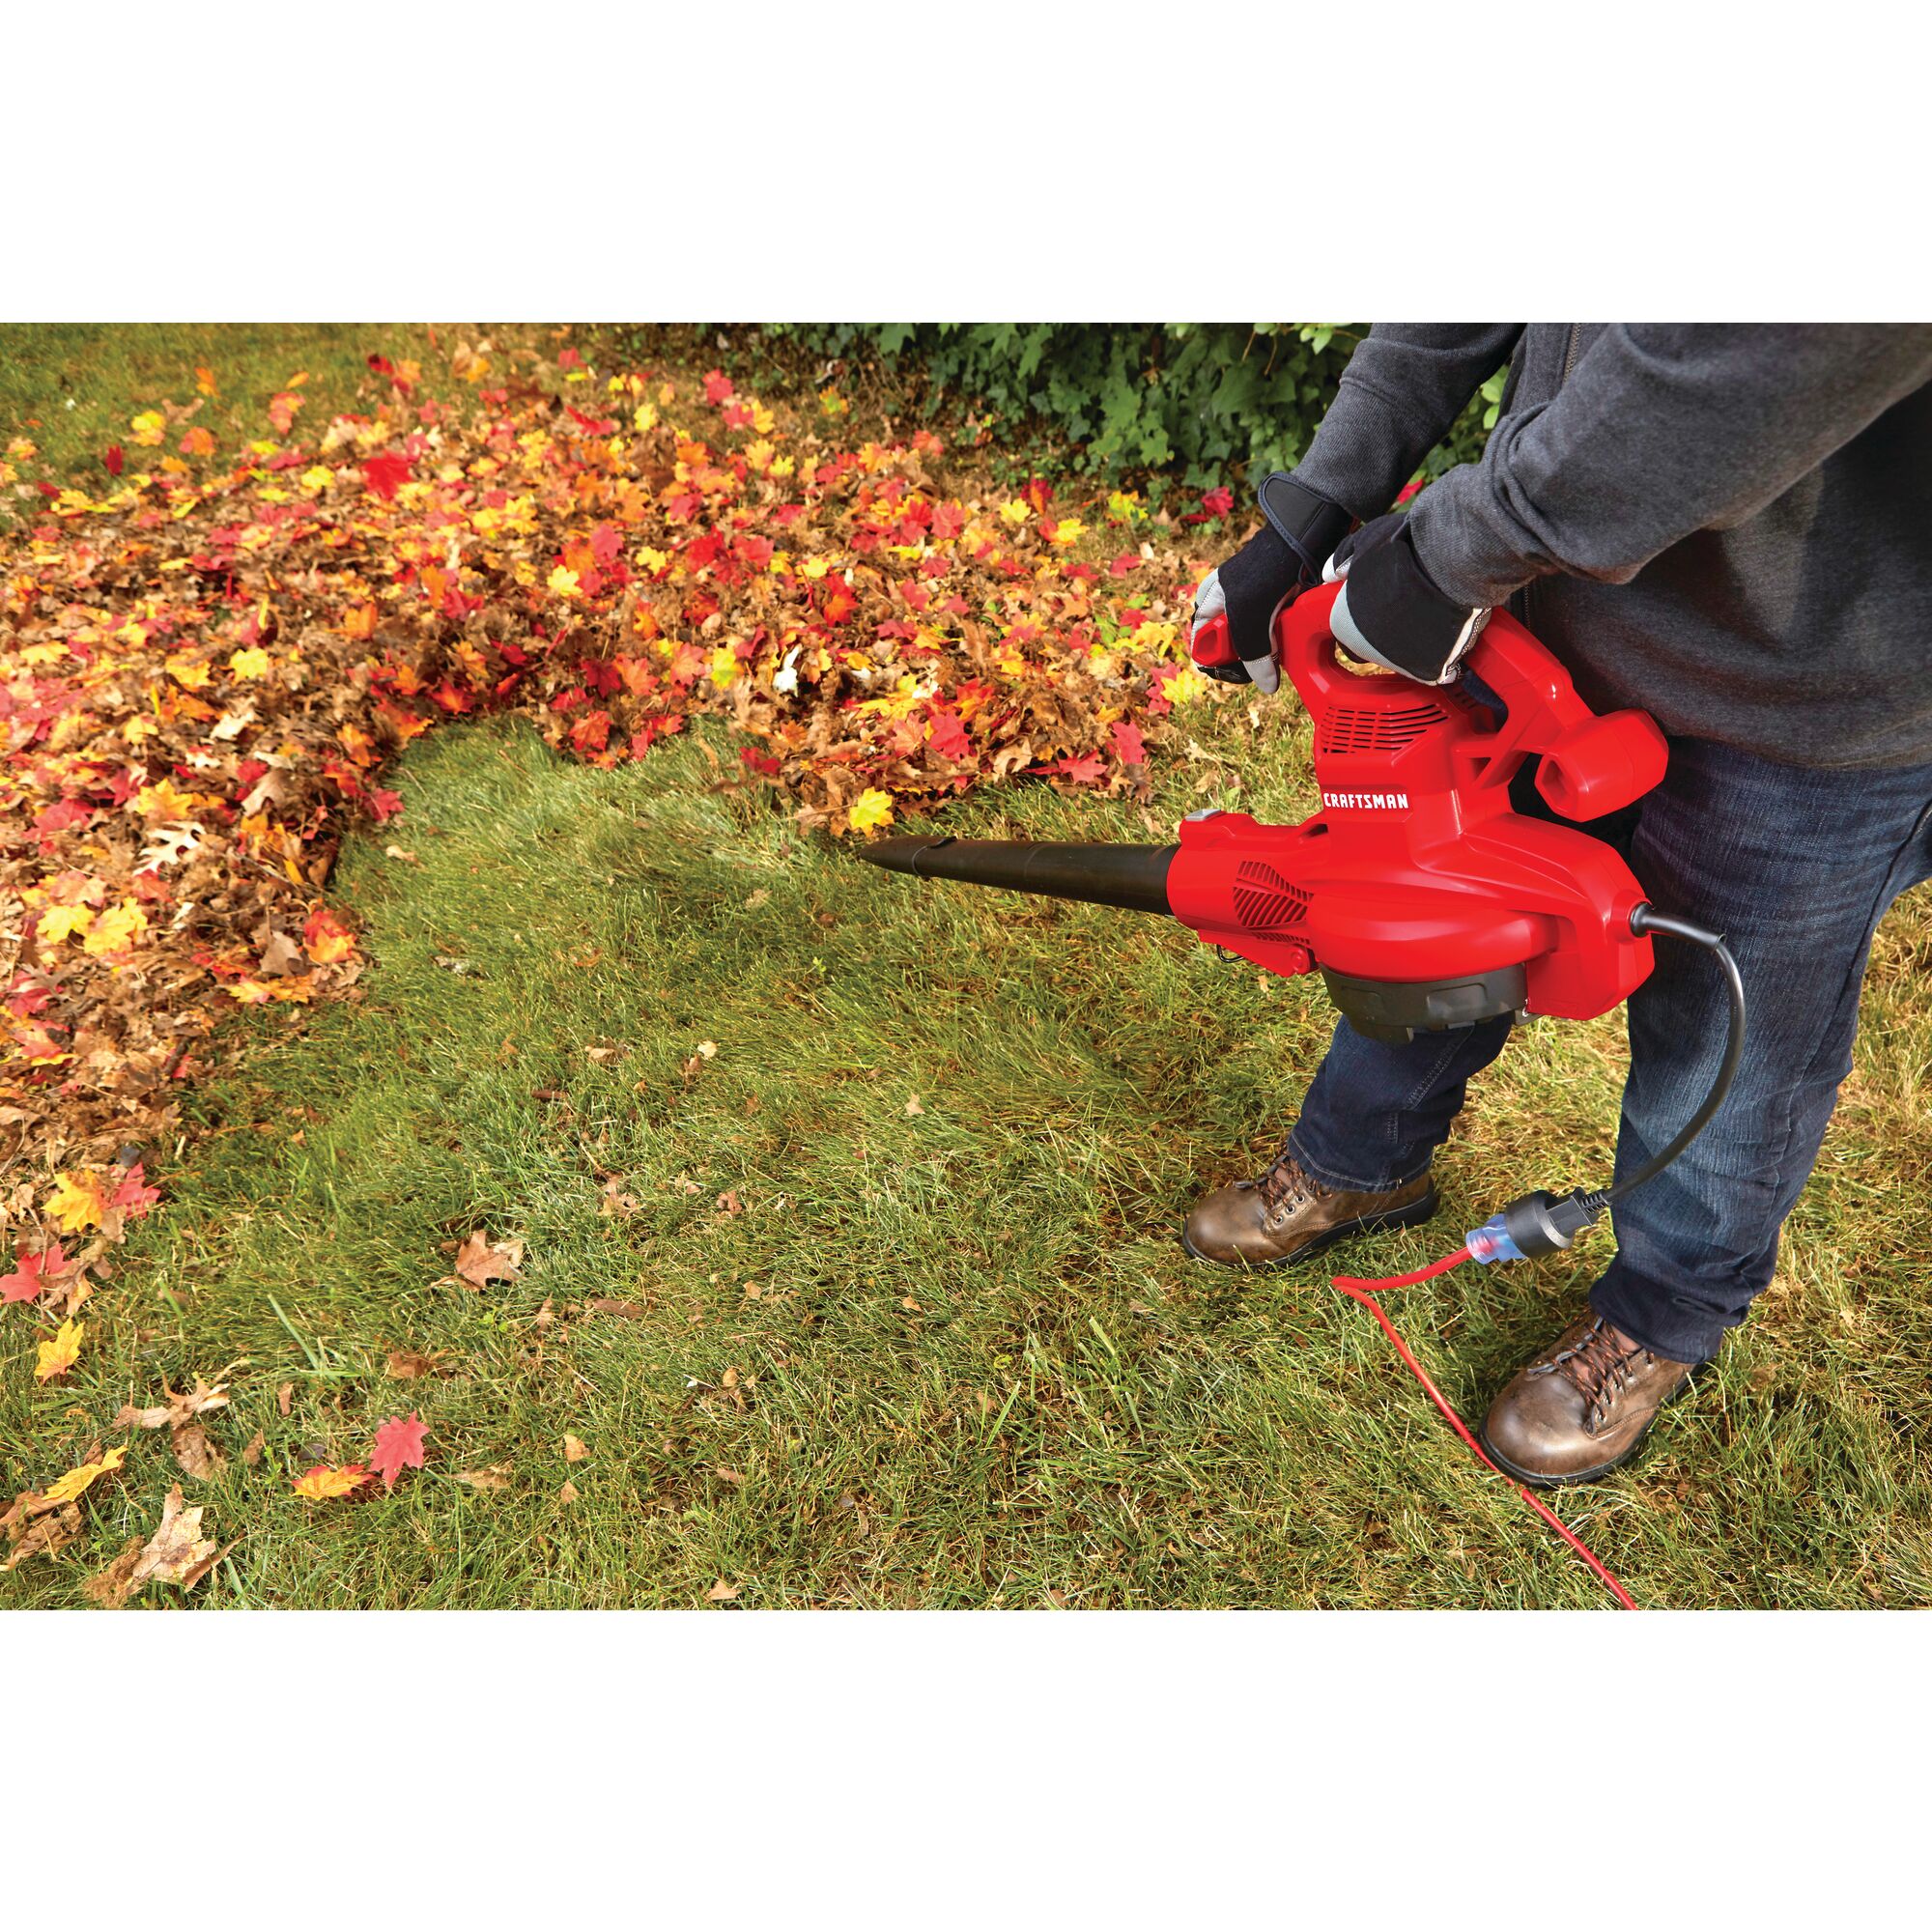 View of CRAFTSMAN Leaf Blowers  being used by consumer